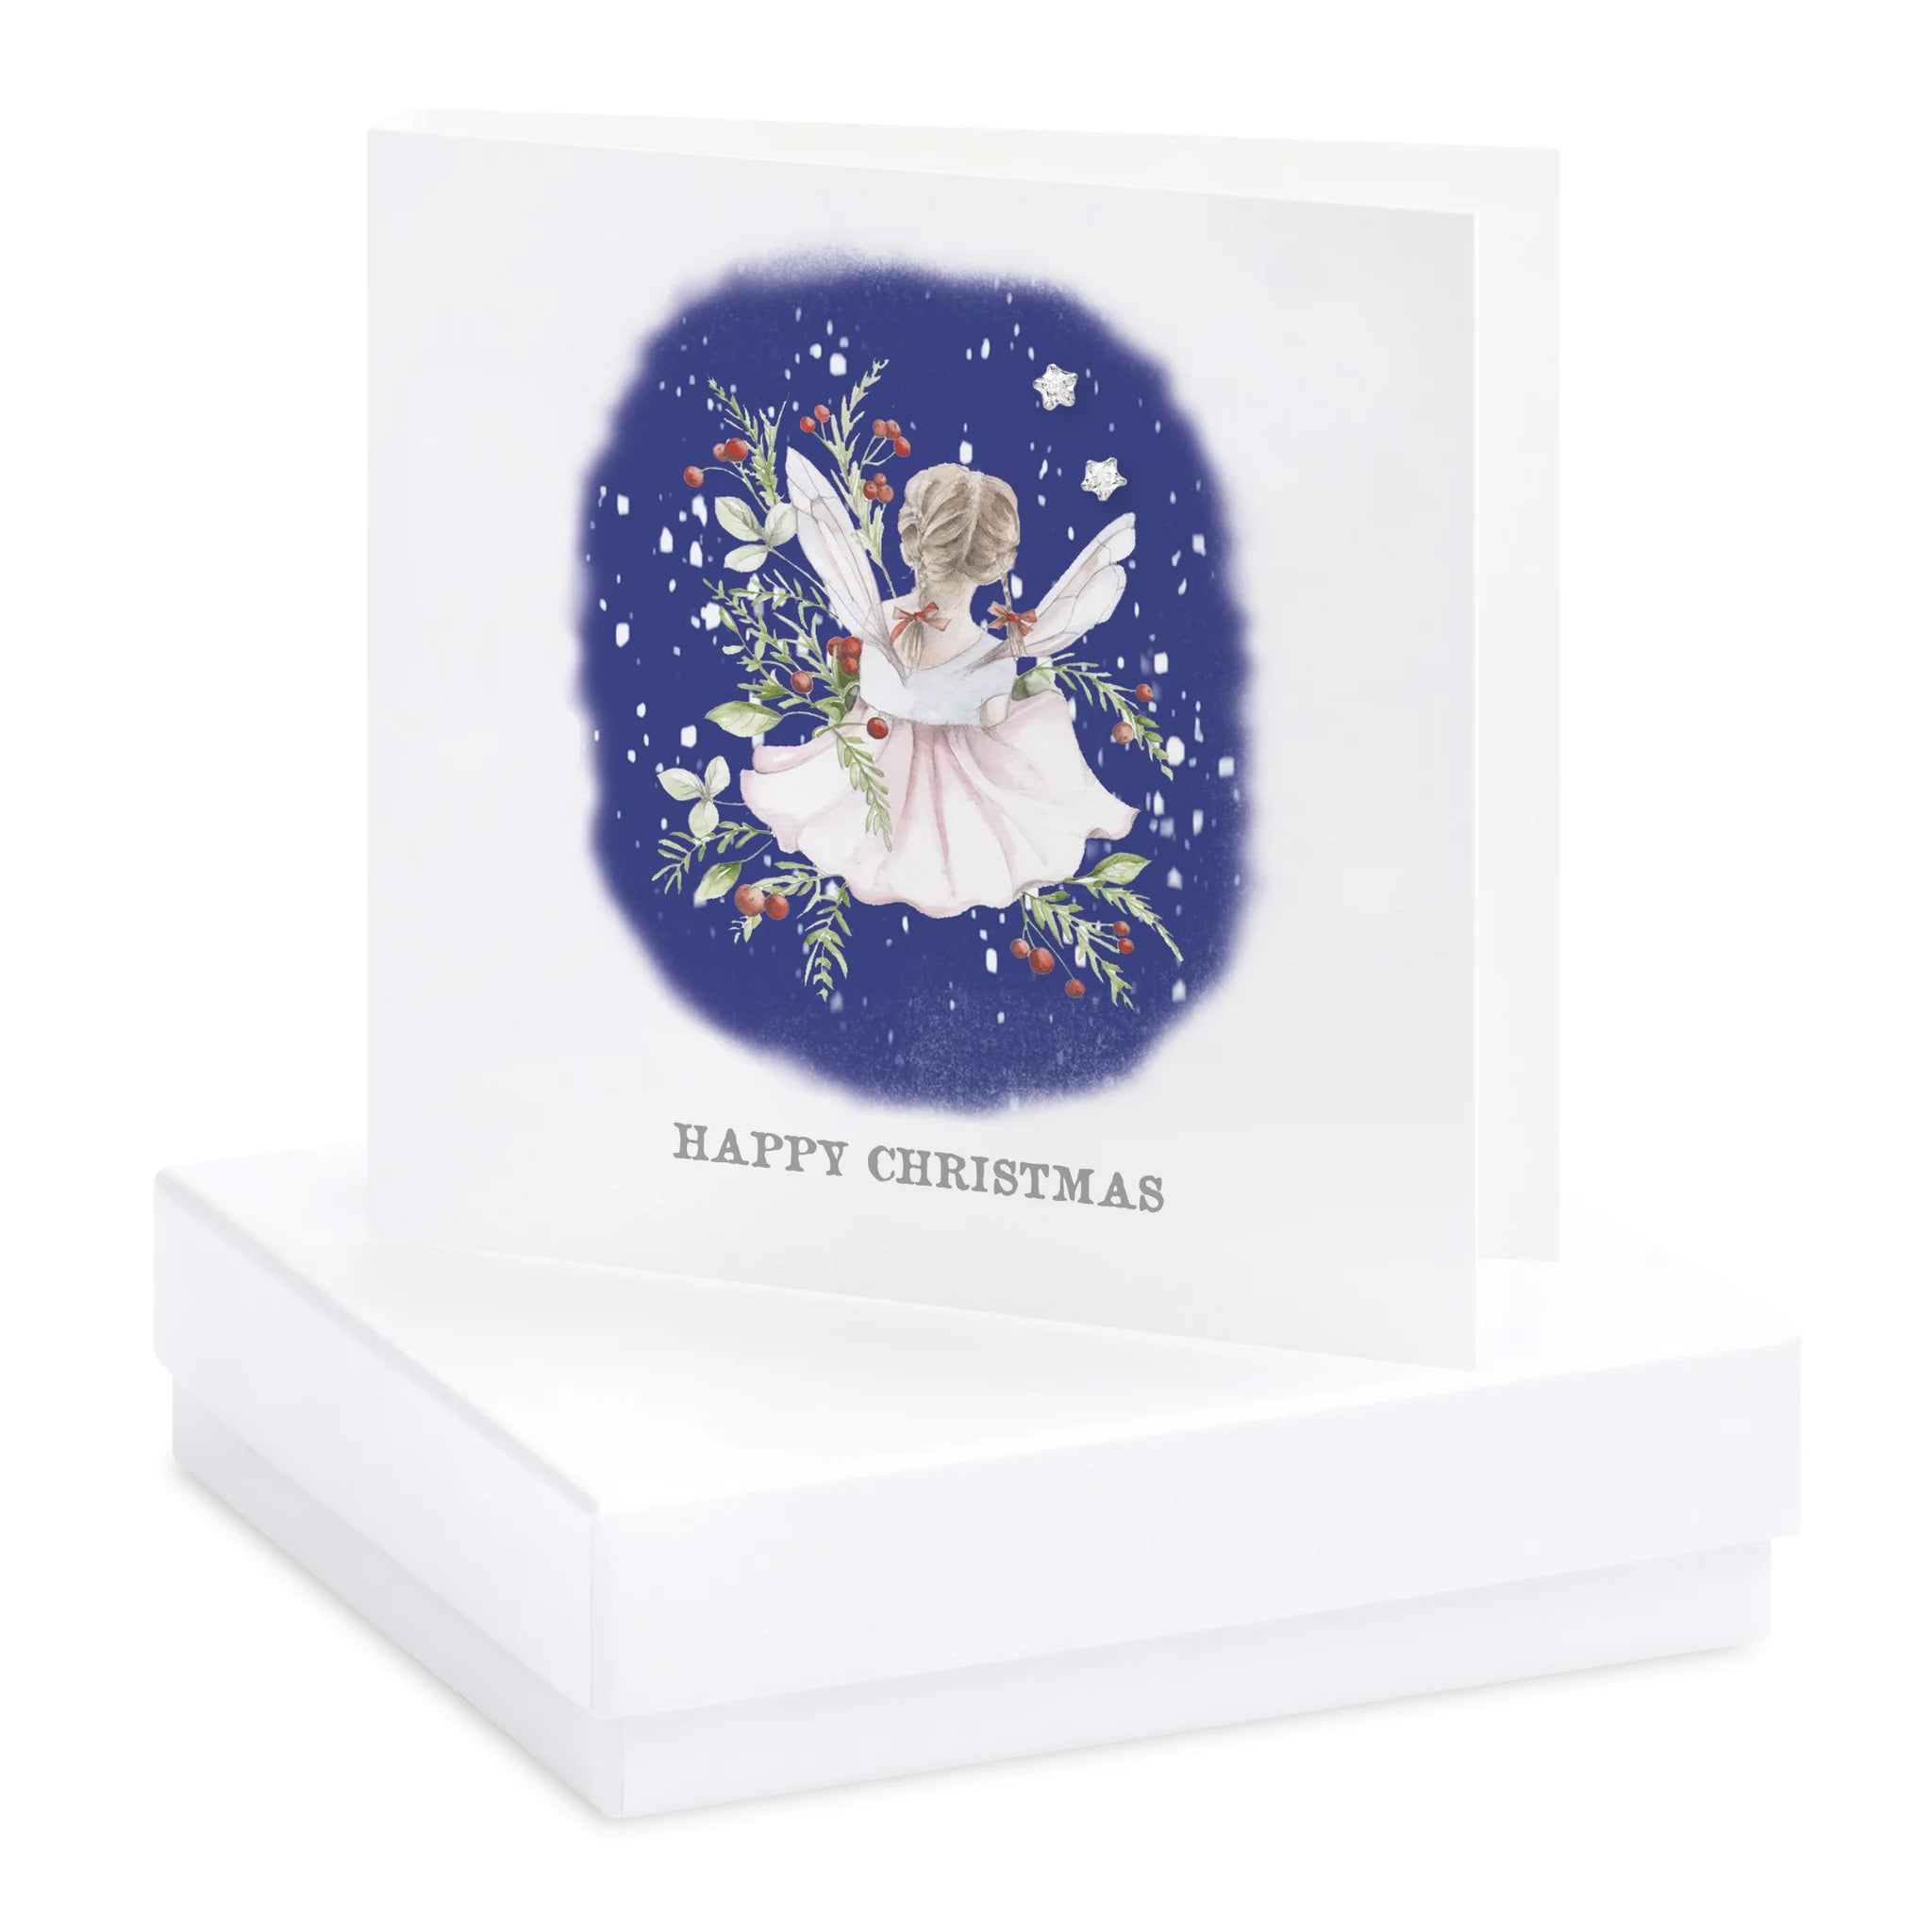 Crumble & Core Christmas Berry Fairy Earring Card with Earrings in a White Box by Weirs of Baggot Street